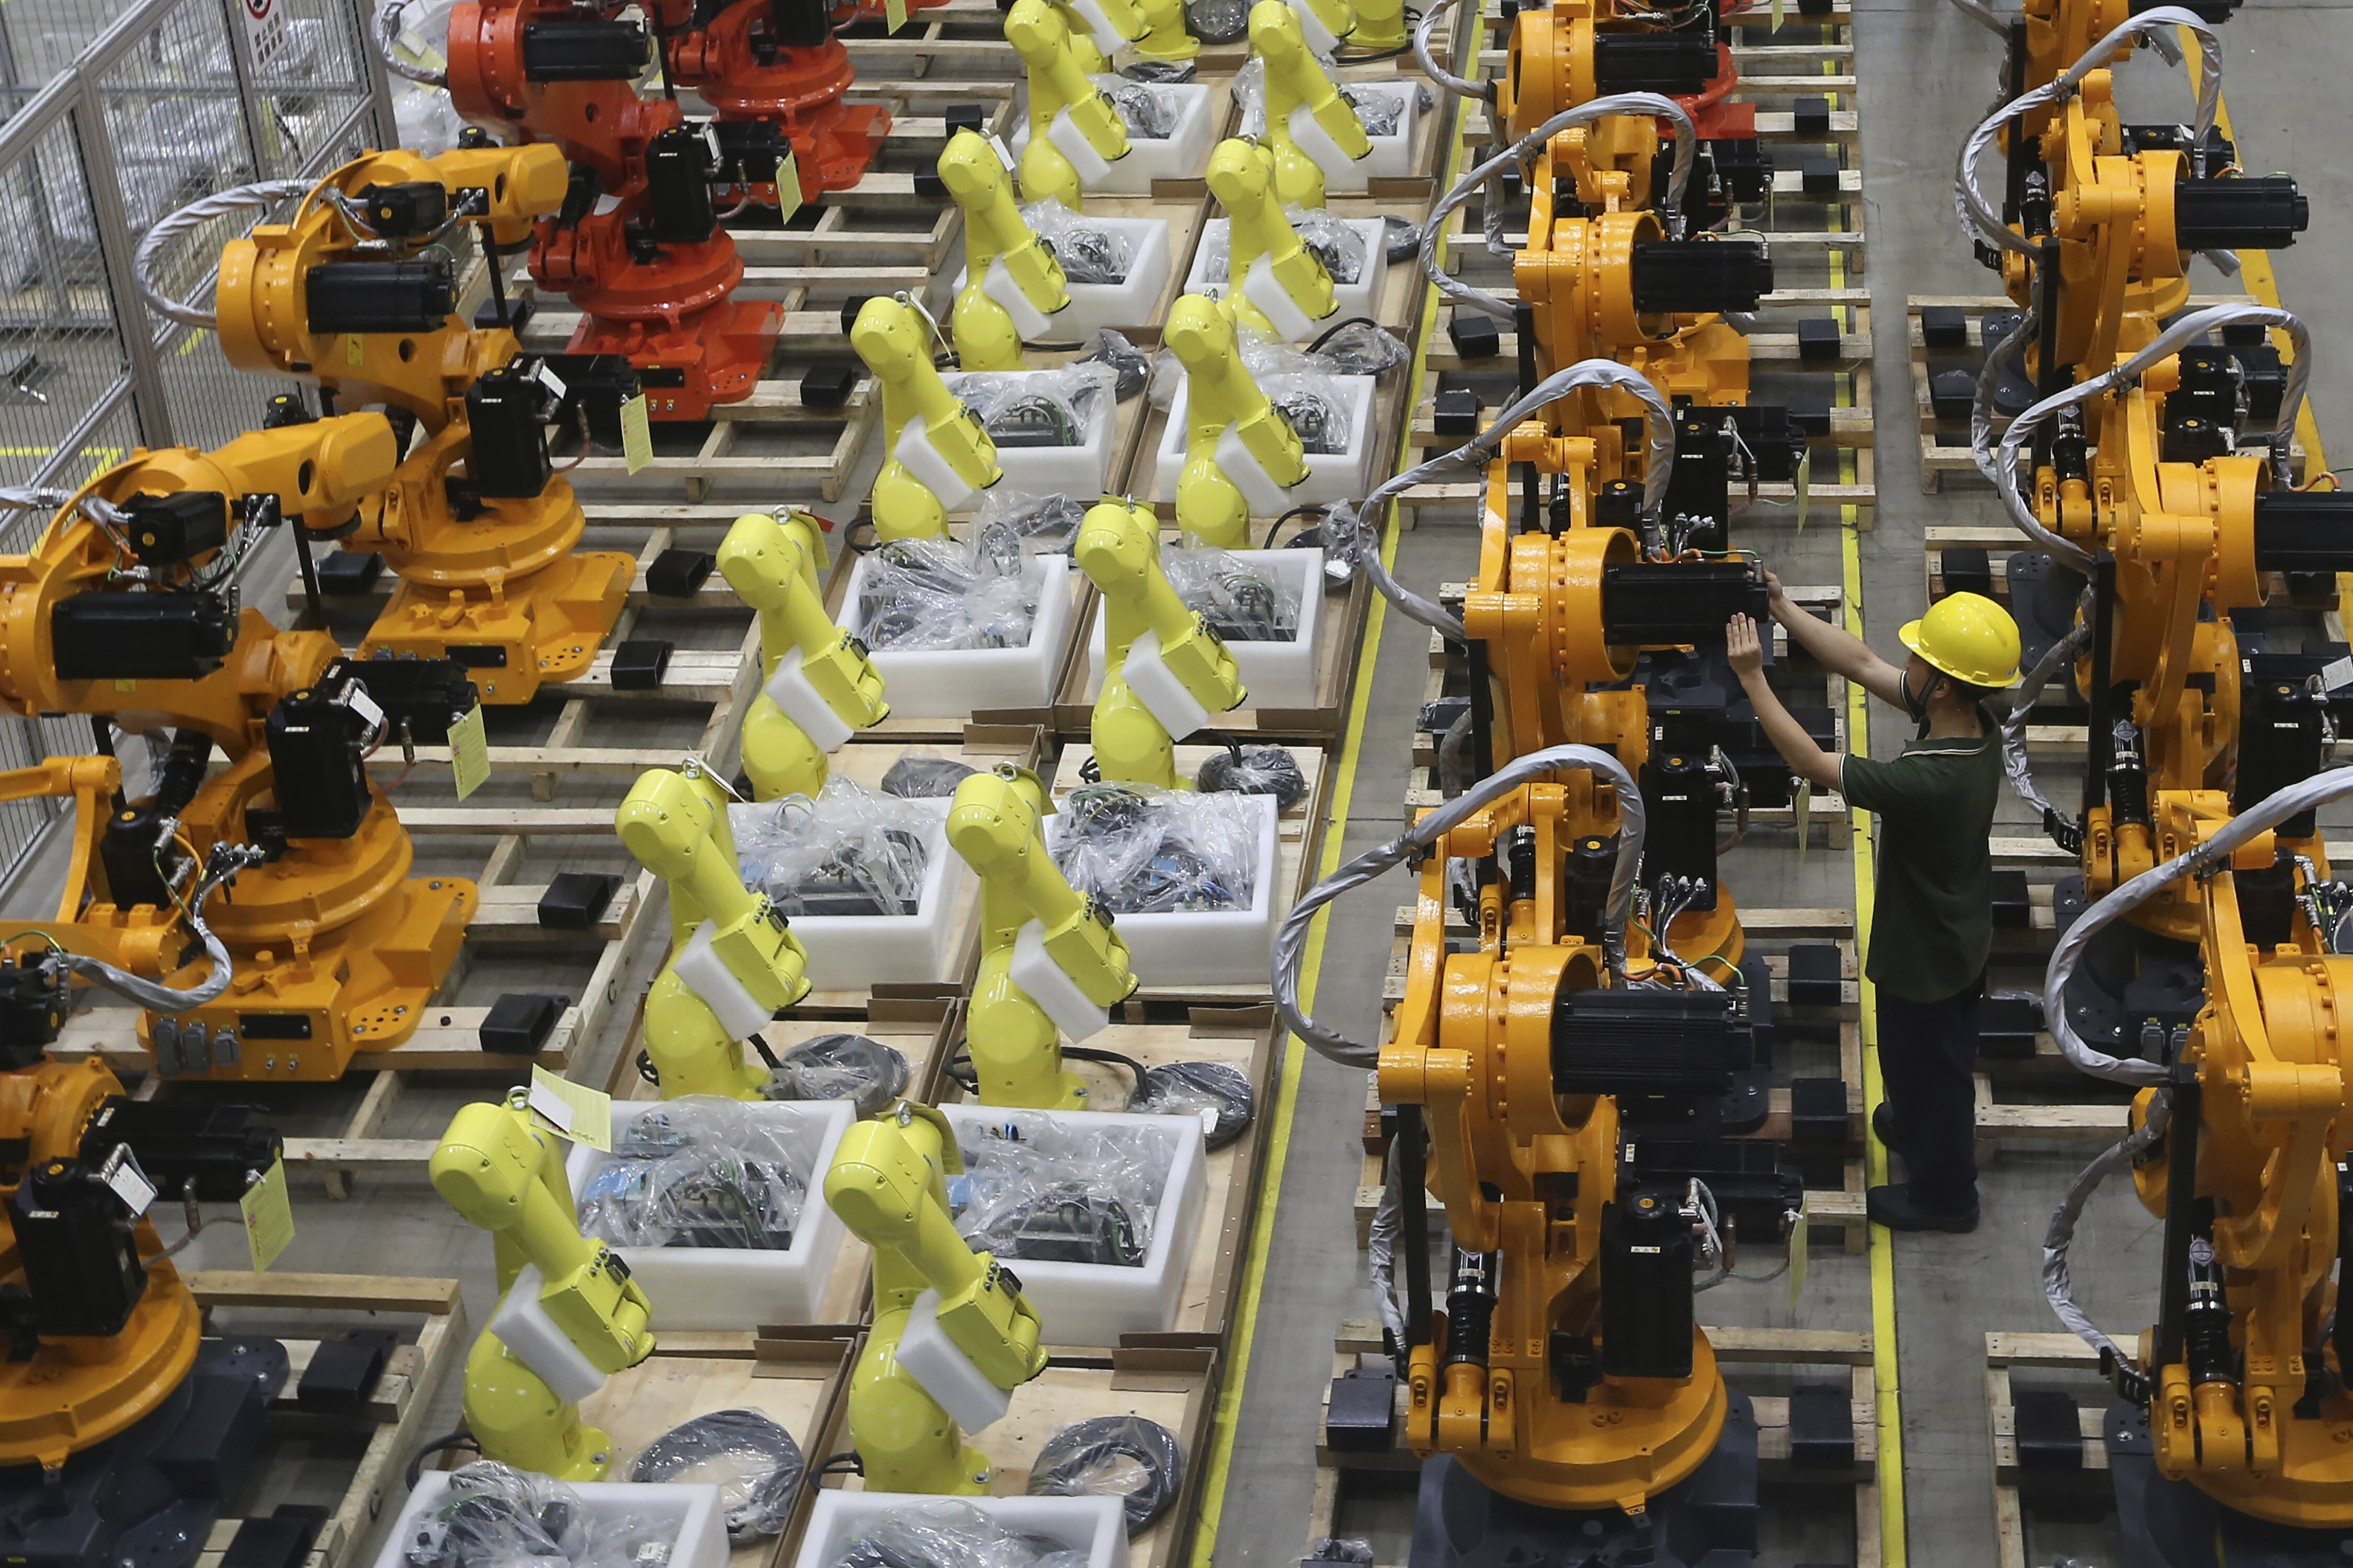 A worker checks on robot arms at a factory in Nanjing in east China’s Jiangsu province in June 2019. Both Chinese and British firms do not perform adequate due diligence. Photo: AP